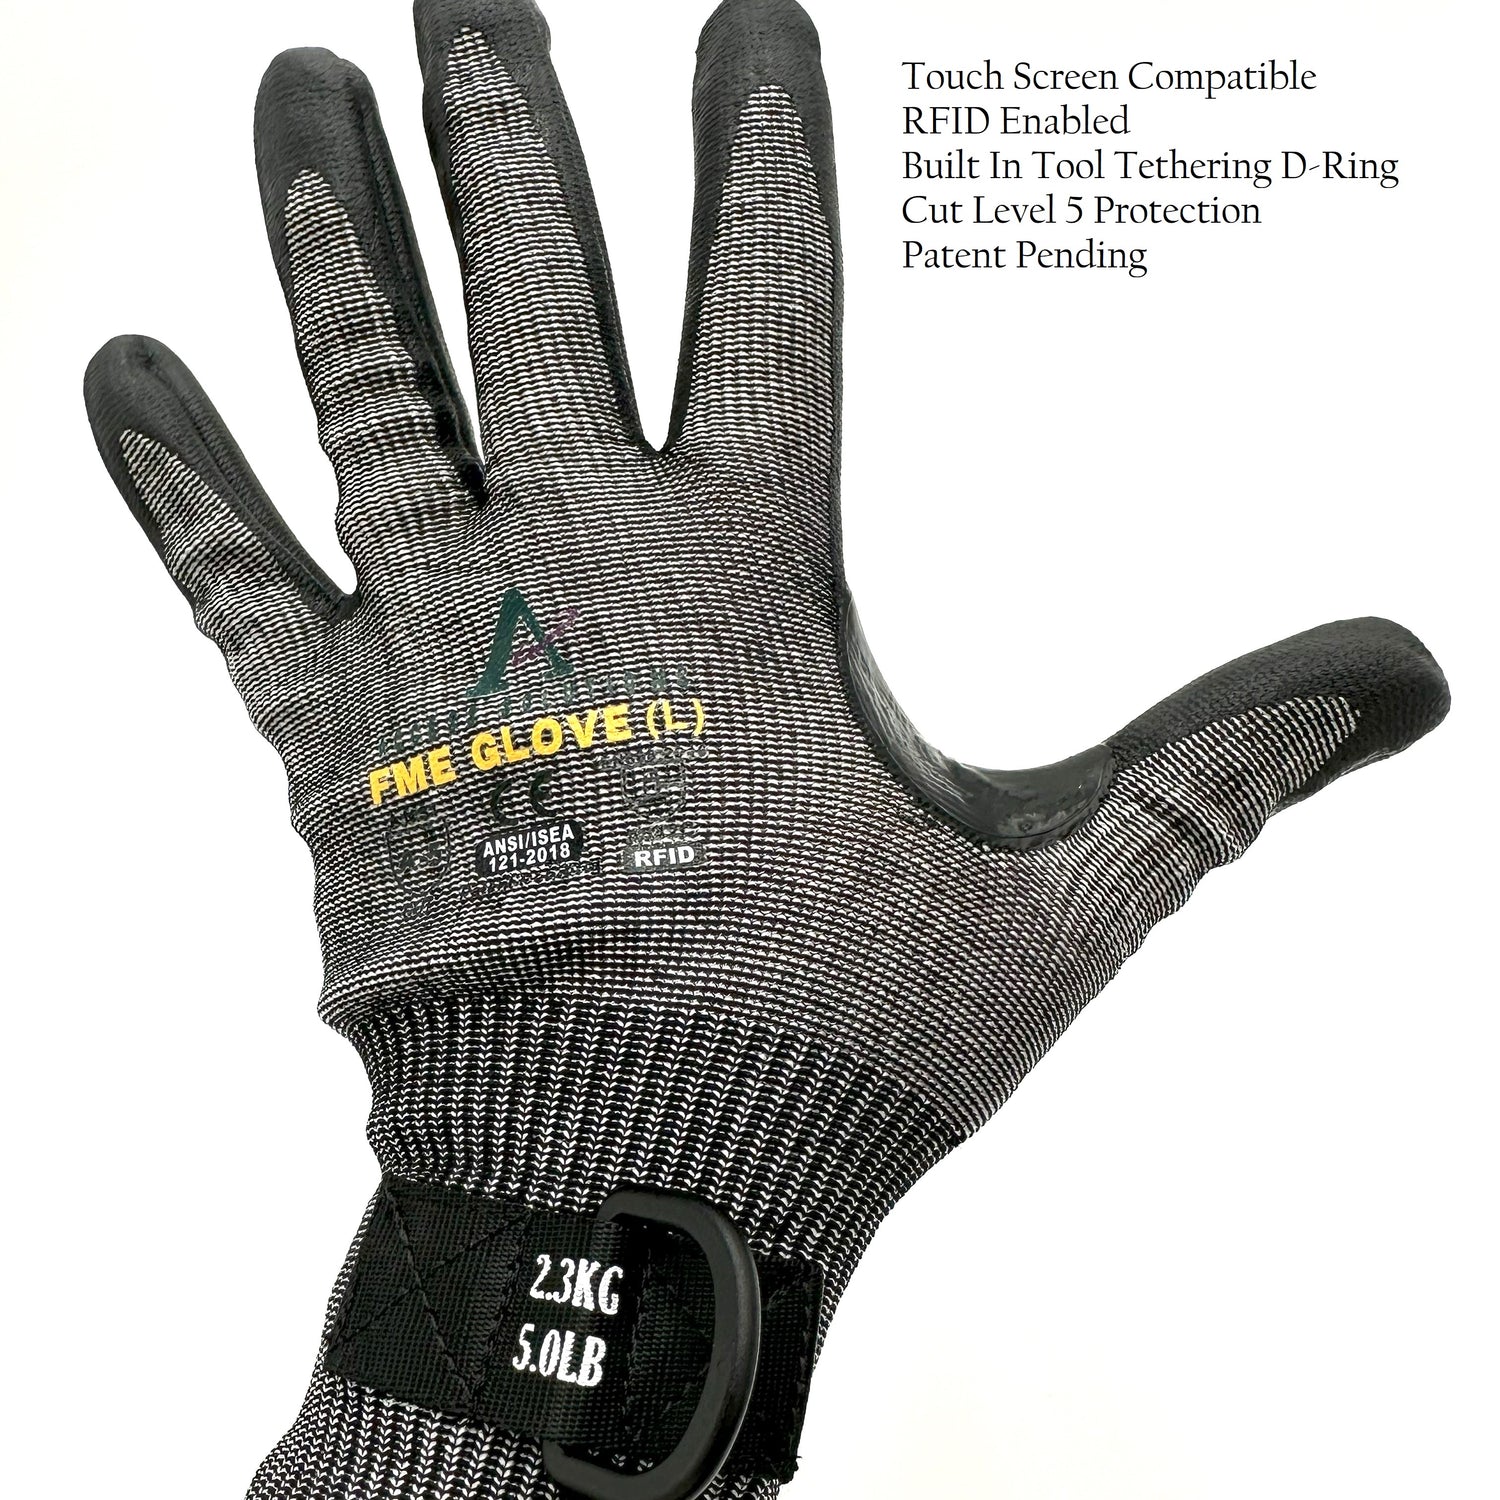 Touch Screen Compatible Work Gloves